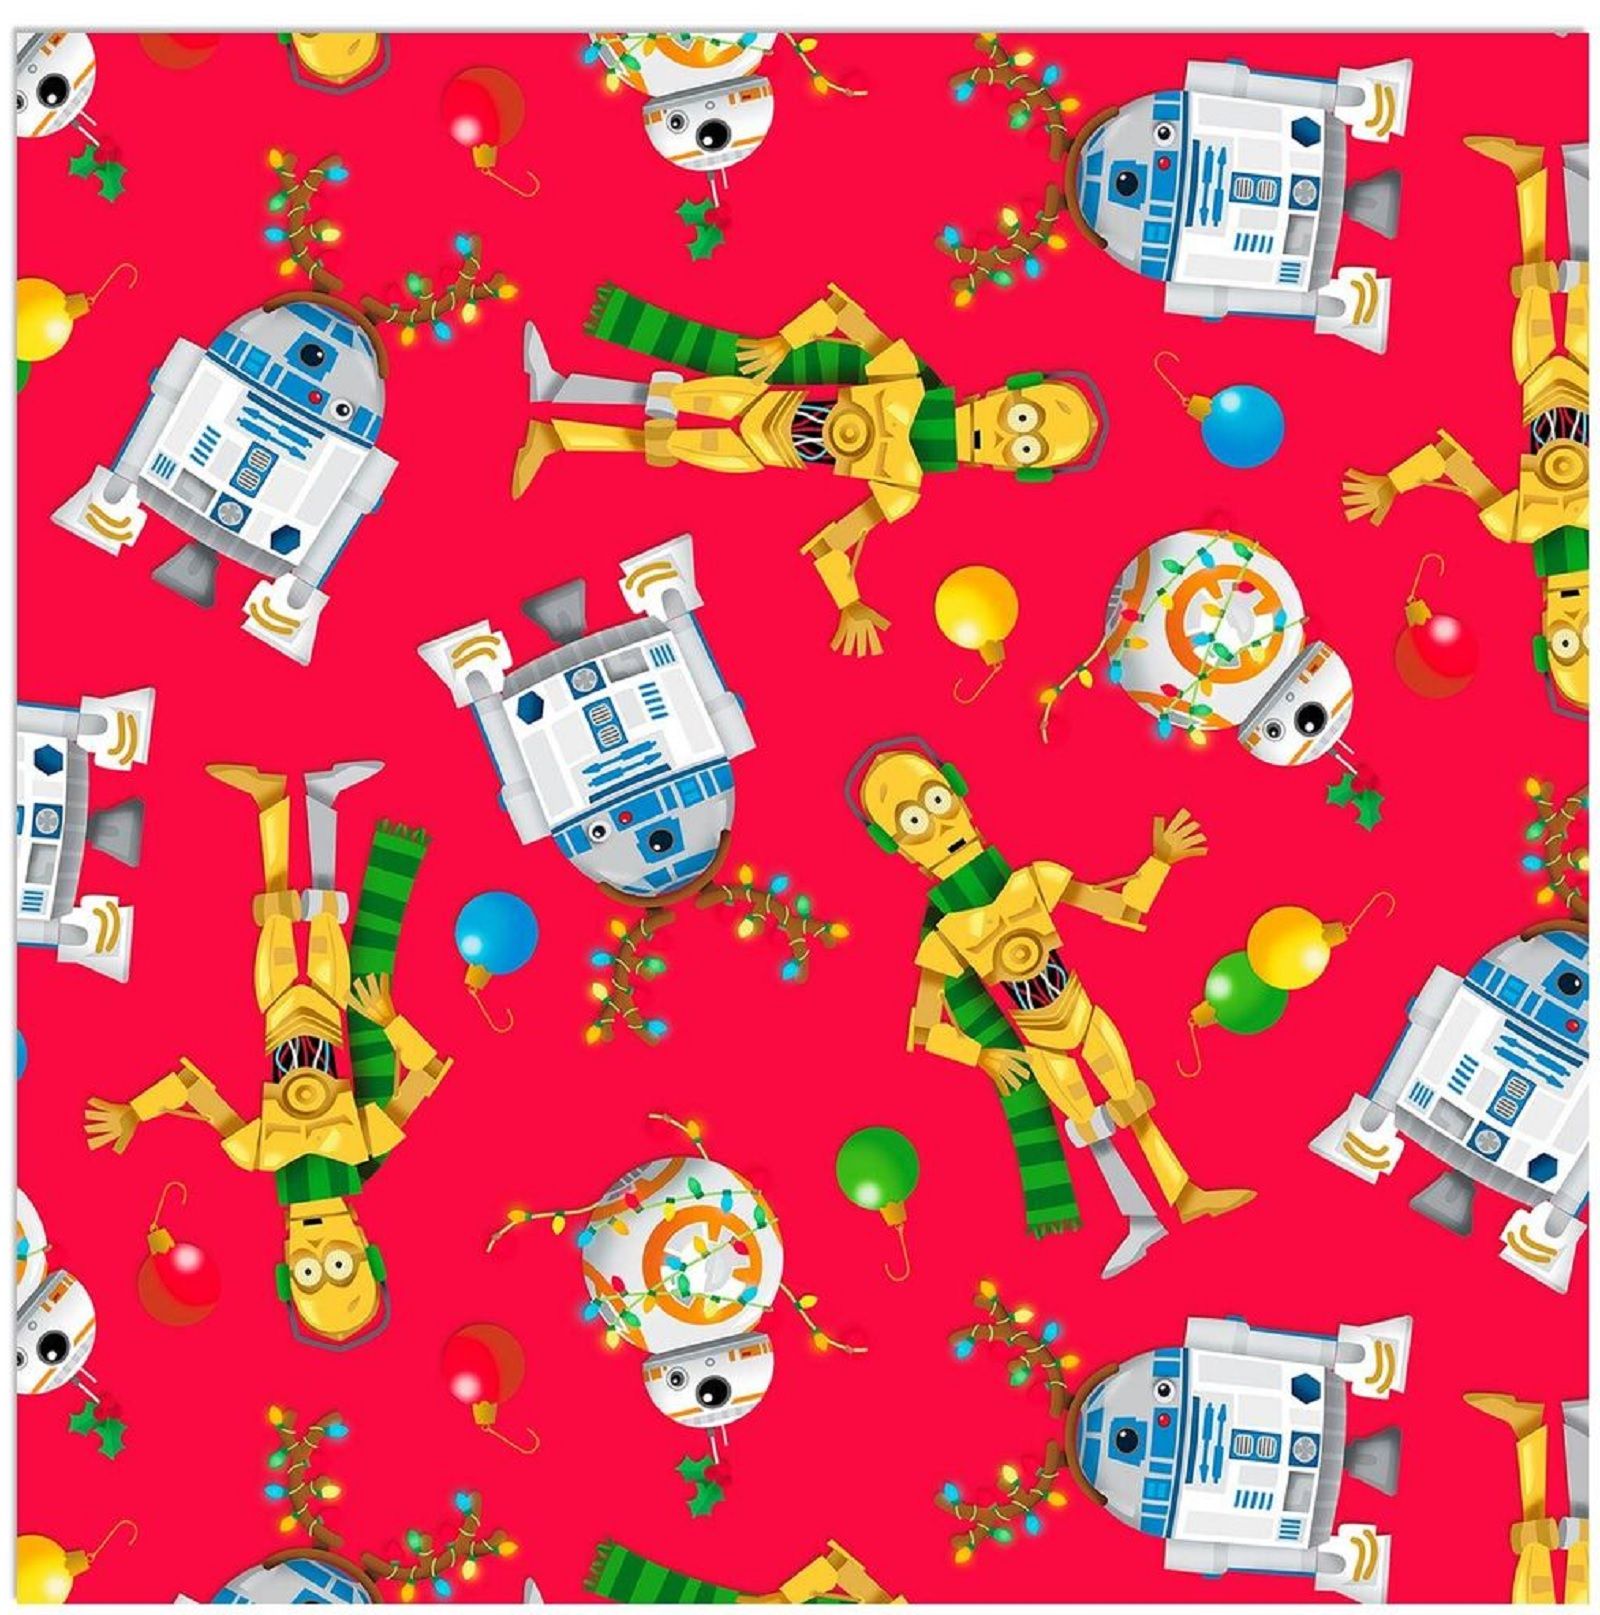 34 Geeky Wrapping Papers To Use On Christmas Gifts This Year image 33